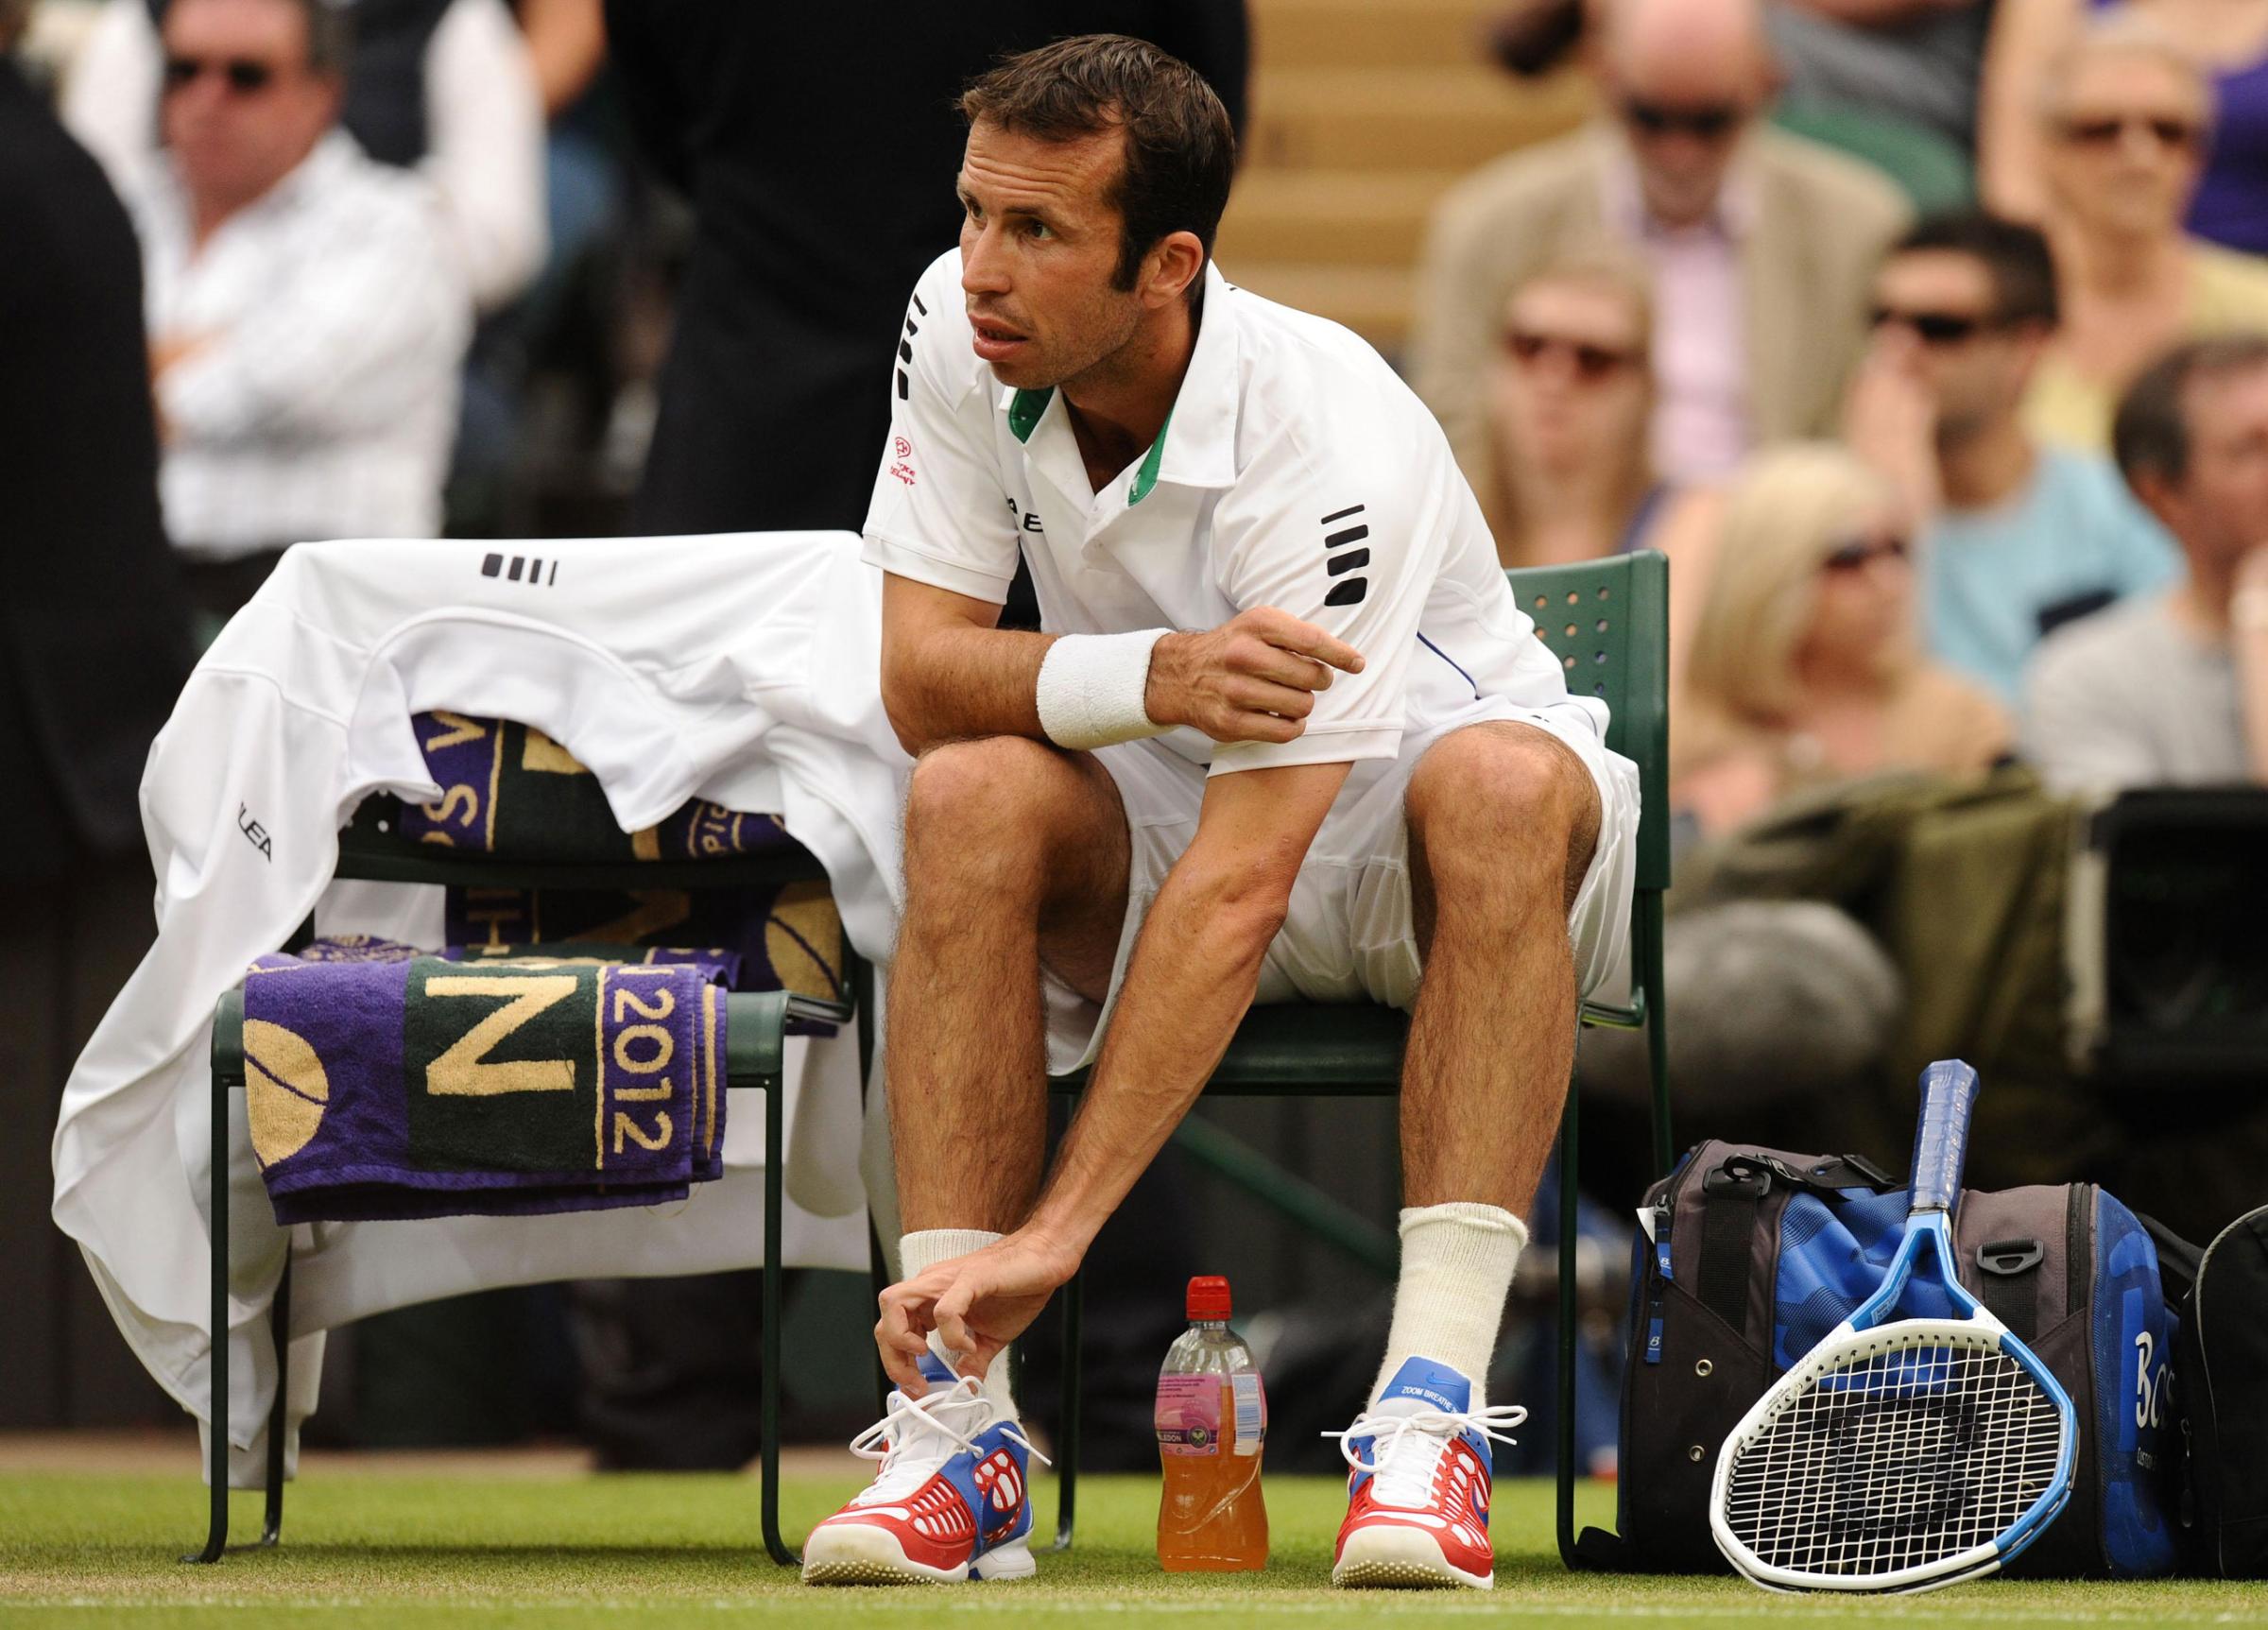 Outfits Banned from Wimbledon